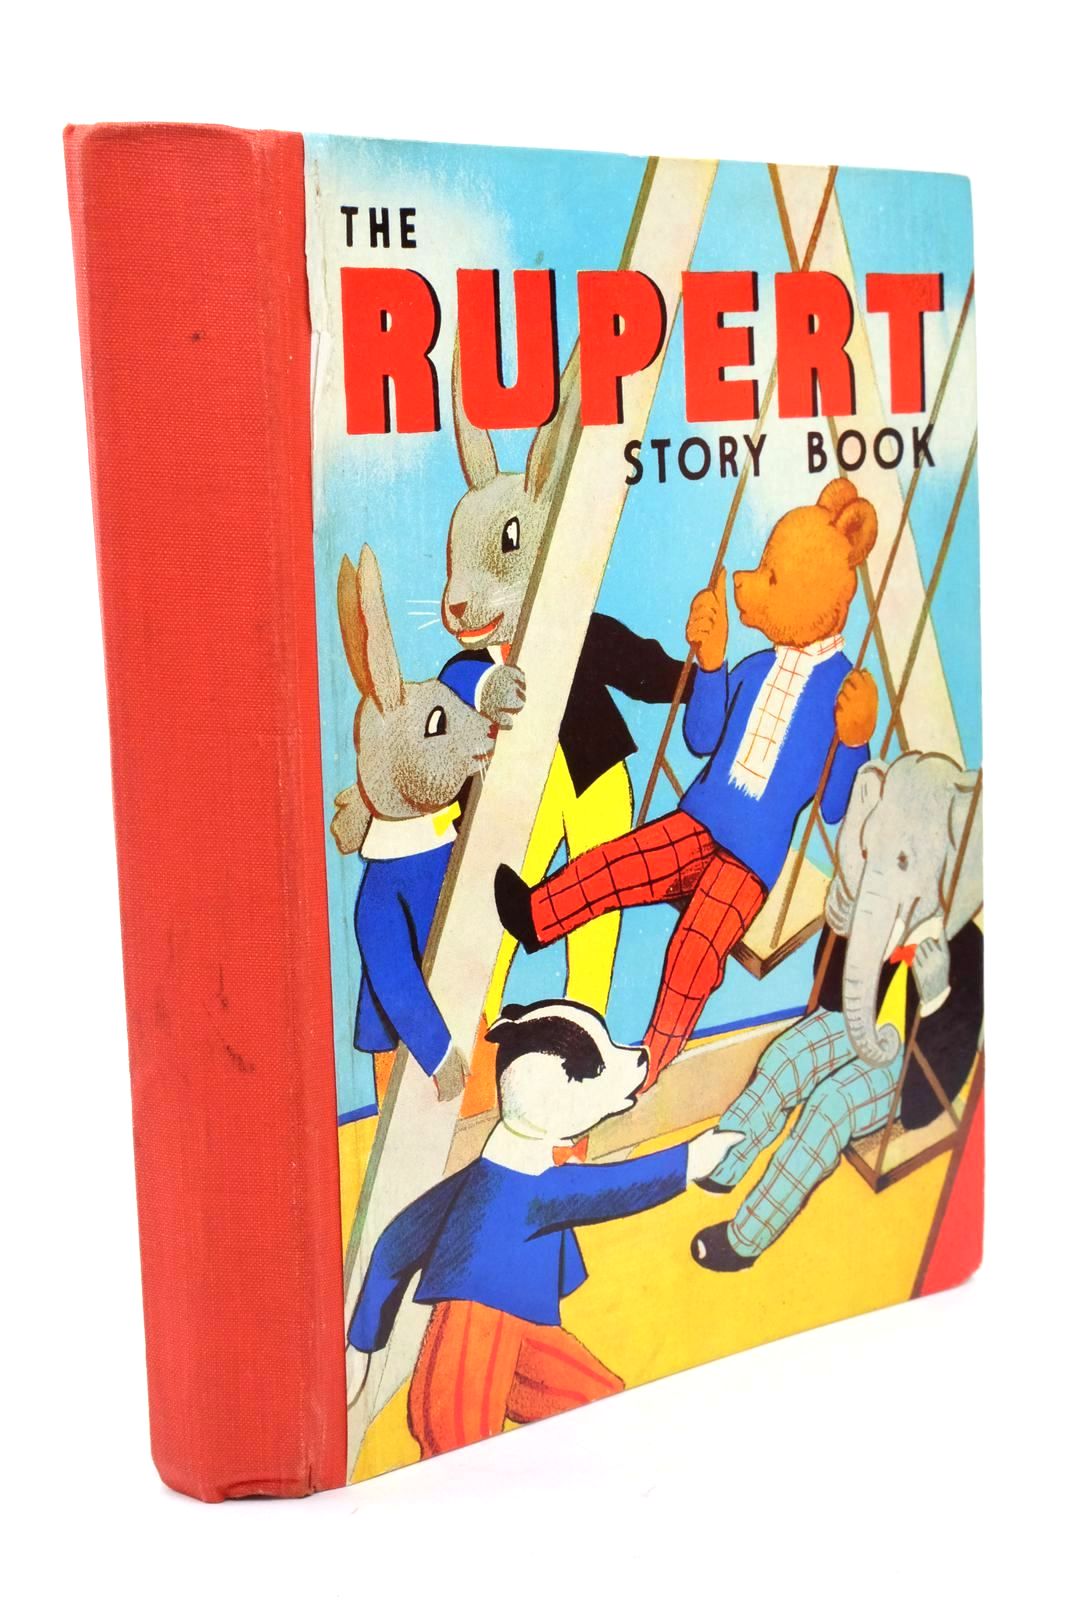 Photo of THE RUPERT STORY BOOK written by Tourtel, Mary illustrated by Tourtel, Mary published by Sampson Low, Marston & Co. Ltd. (STOCK CODE: 1322506)  for sale by Stella & Rose's Books